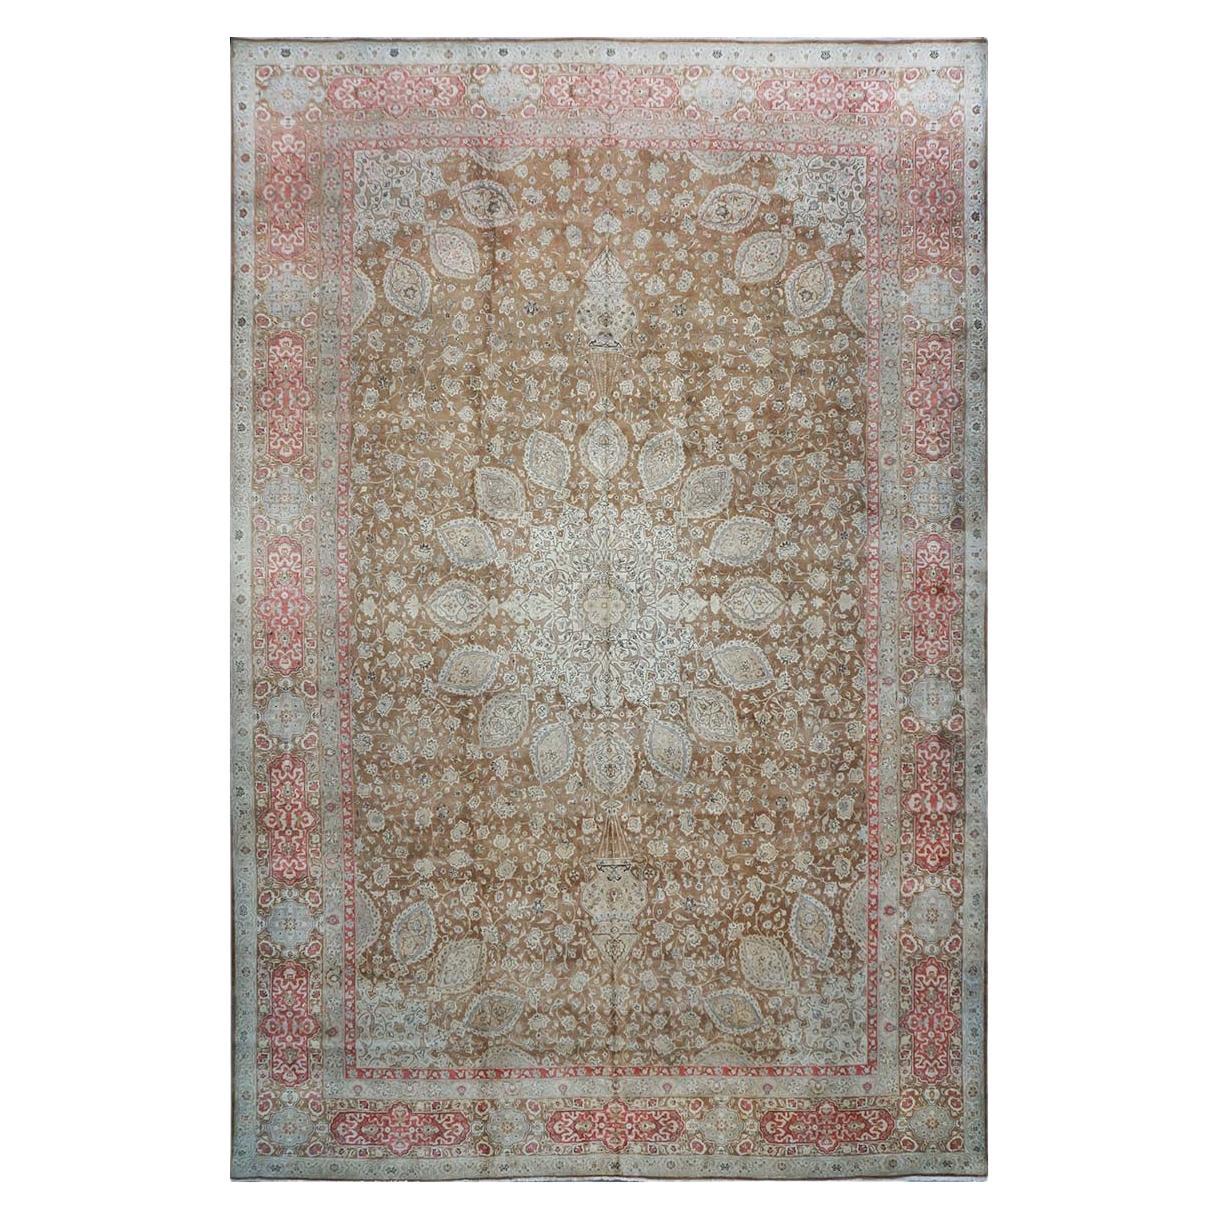 Antique 1930s Persian Tabriz 13x20 Brown & Salmon Oversized Handmade Area Rug For Sale